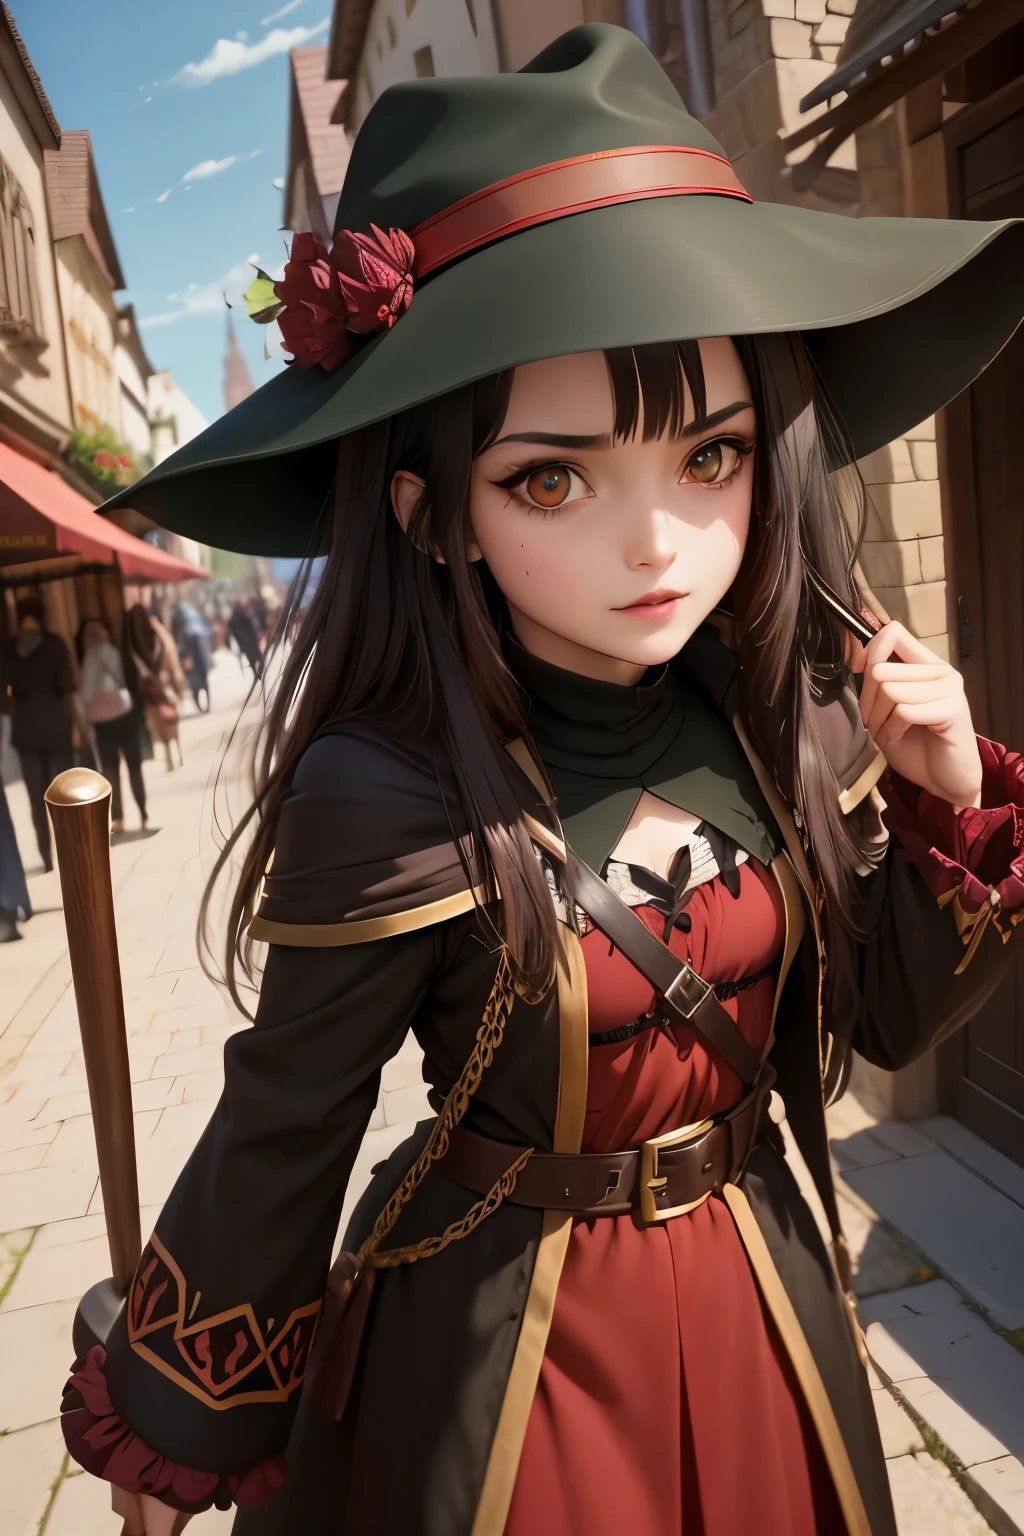 Megumin archimage /have black hair and red eyes) and her daughter 13 years old Esmeralda archmage's apprentice (Have brunette color hair and dark green eyes), wearing sorcerer hats, medieval city, fight against enemy,